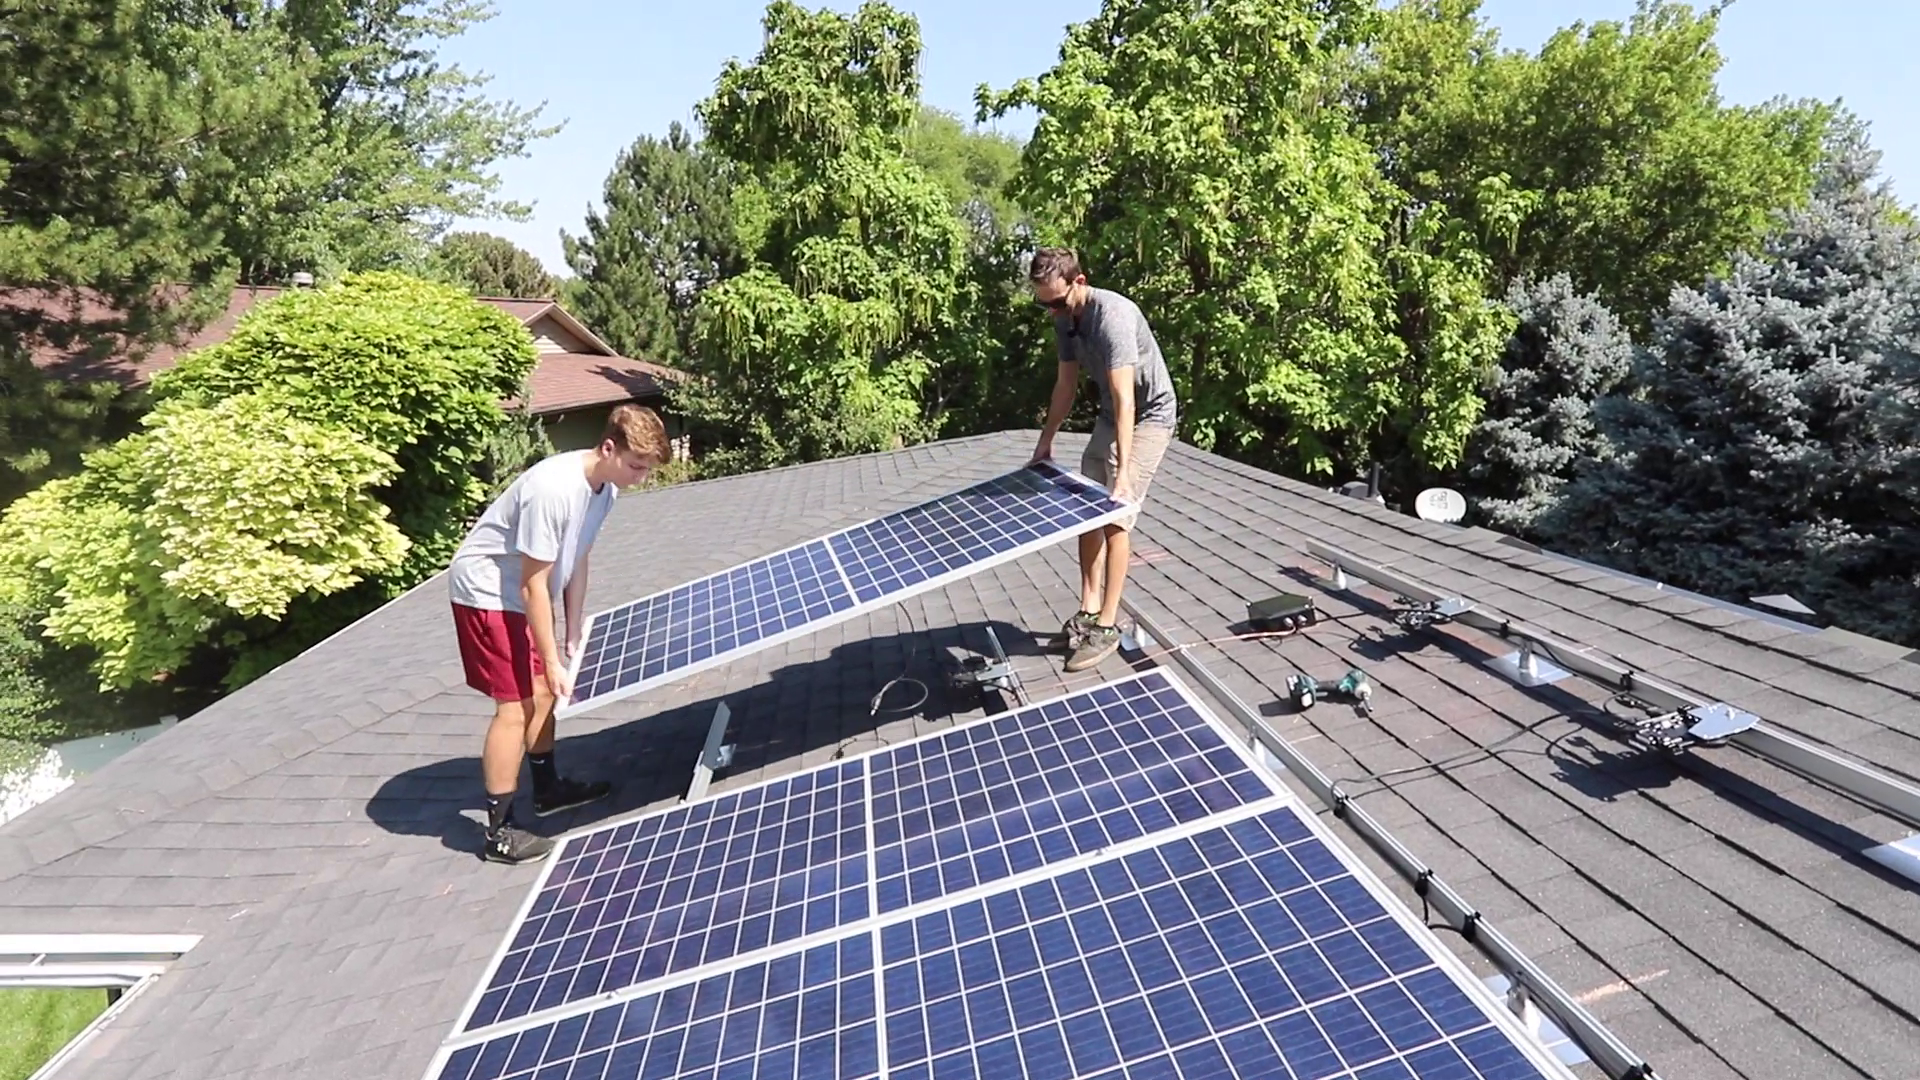 Installing solar panels on a roof of a house